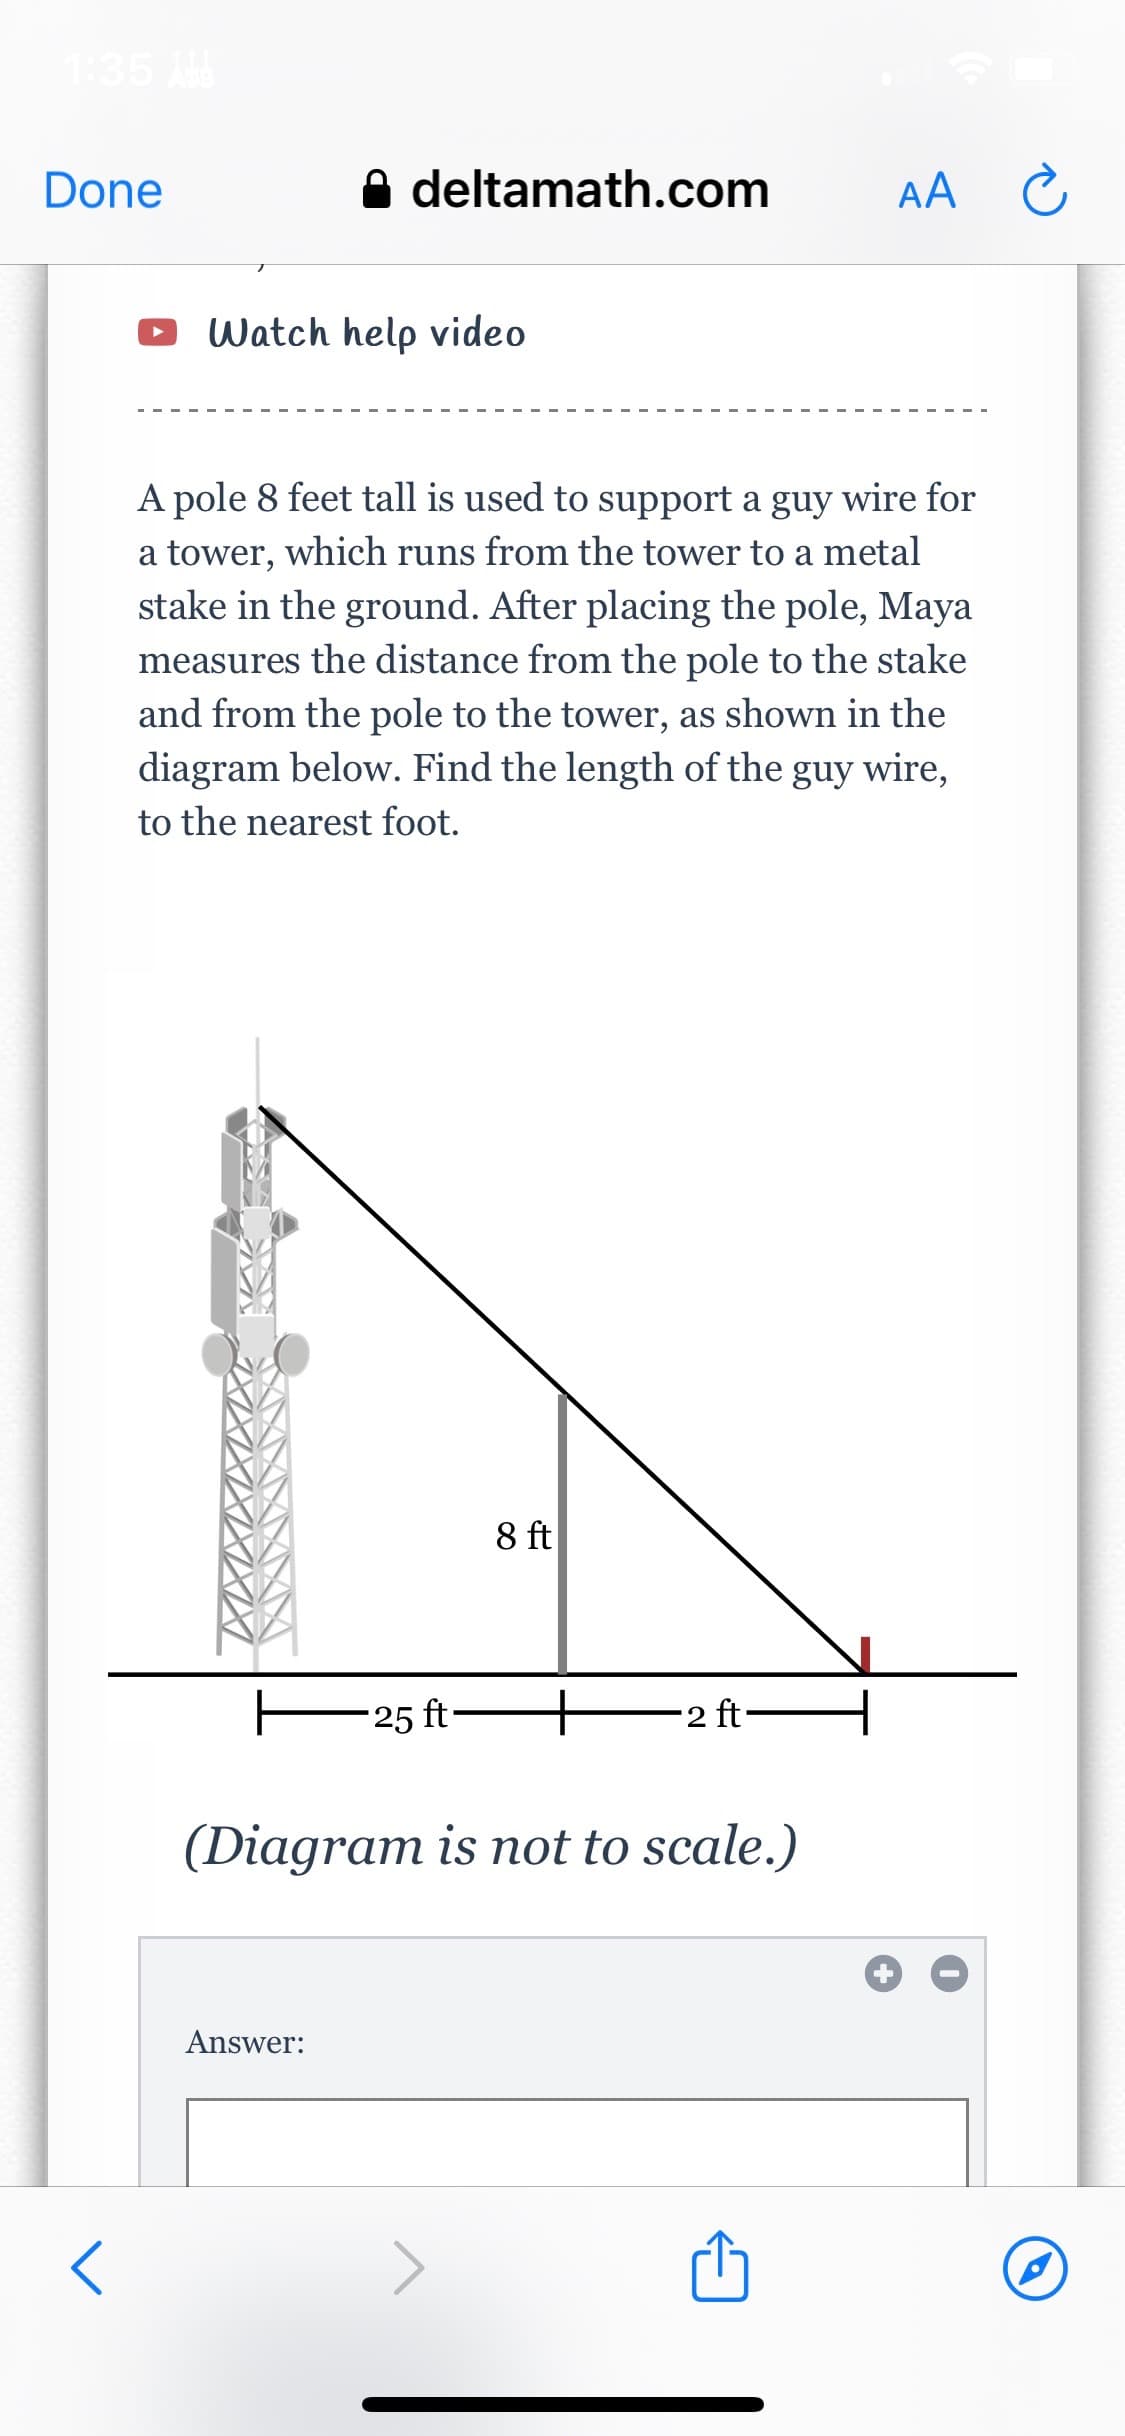 Done
deltamath.com
Watch help video
A pole 8 feet tall is used to support a guy wire for
a tower, which runs from the tower to a metal
stake in the ground. After placing the pole, Maya
measures the distance from the pole to the stake
and from the pole to the tower, as shown in the
diagram below. Find the length of the guy wire,
to the nearest foot.
Answer:
25 ft-
8 ft
2 ft-
(Diagram is not to scale.)
AA C